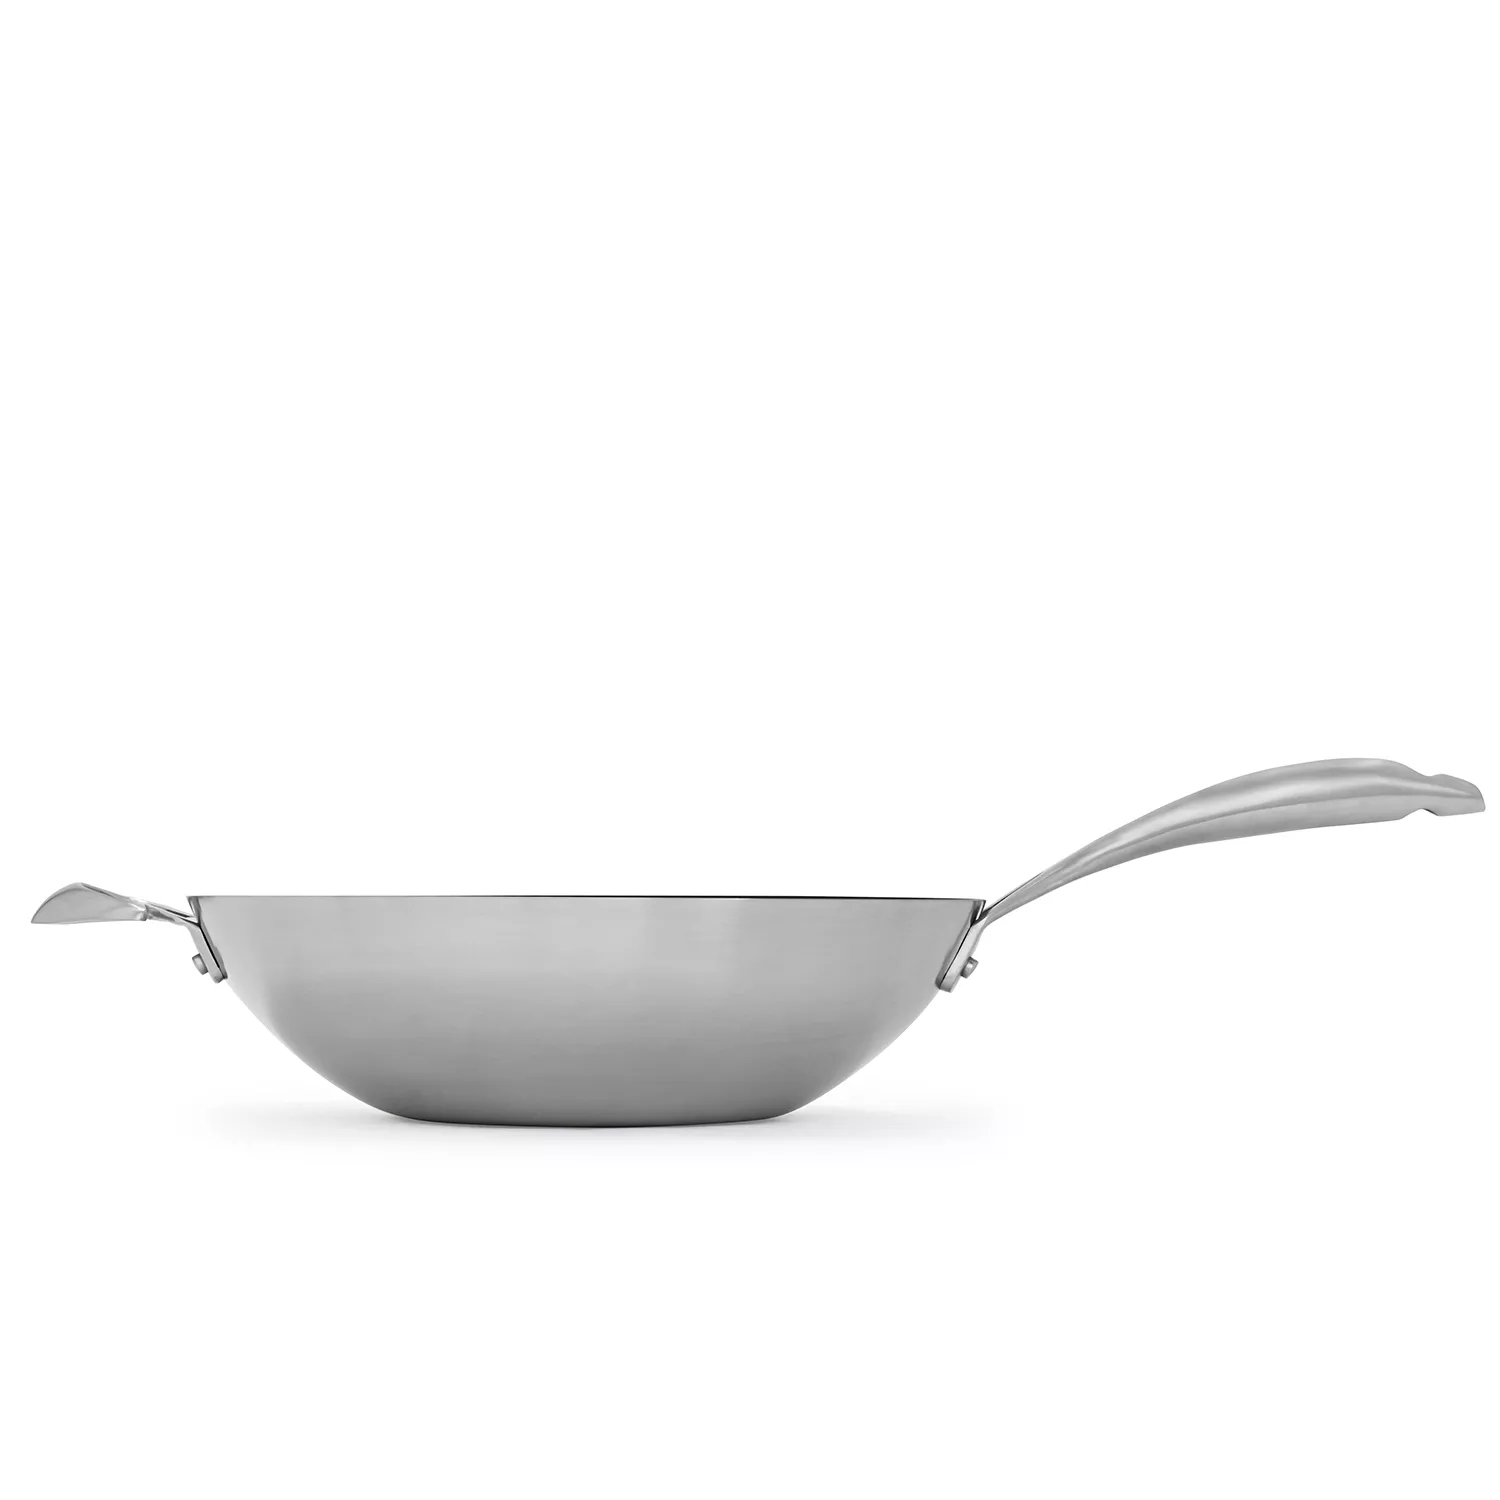 Met Lux 7.5 qt Stainless Steel Sauce Pan - Induction Ready, Dual Handle - 1 Count Box